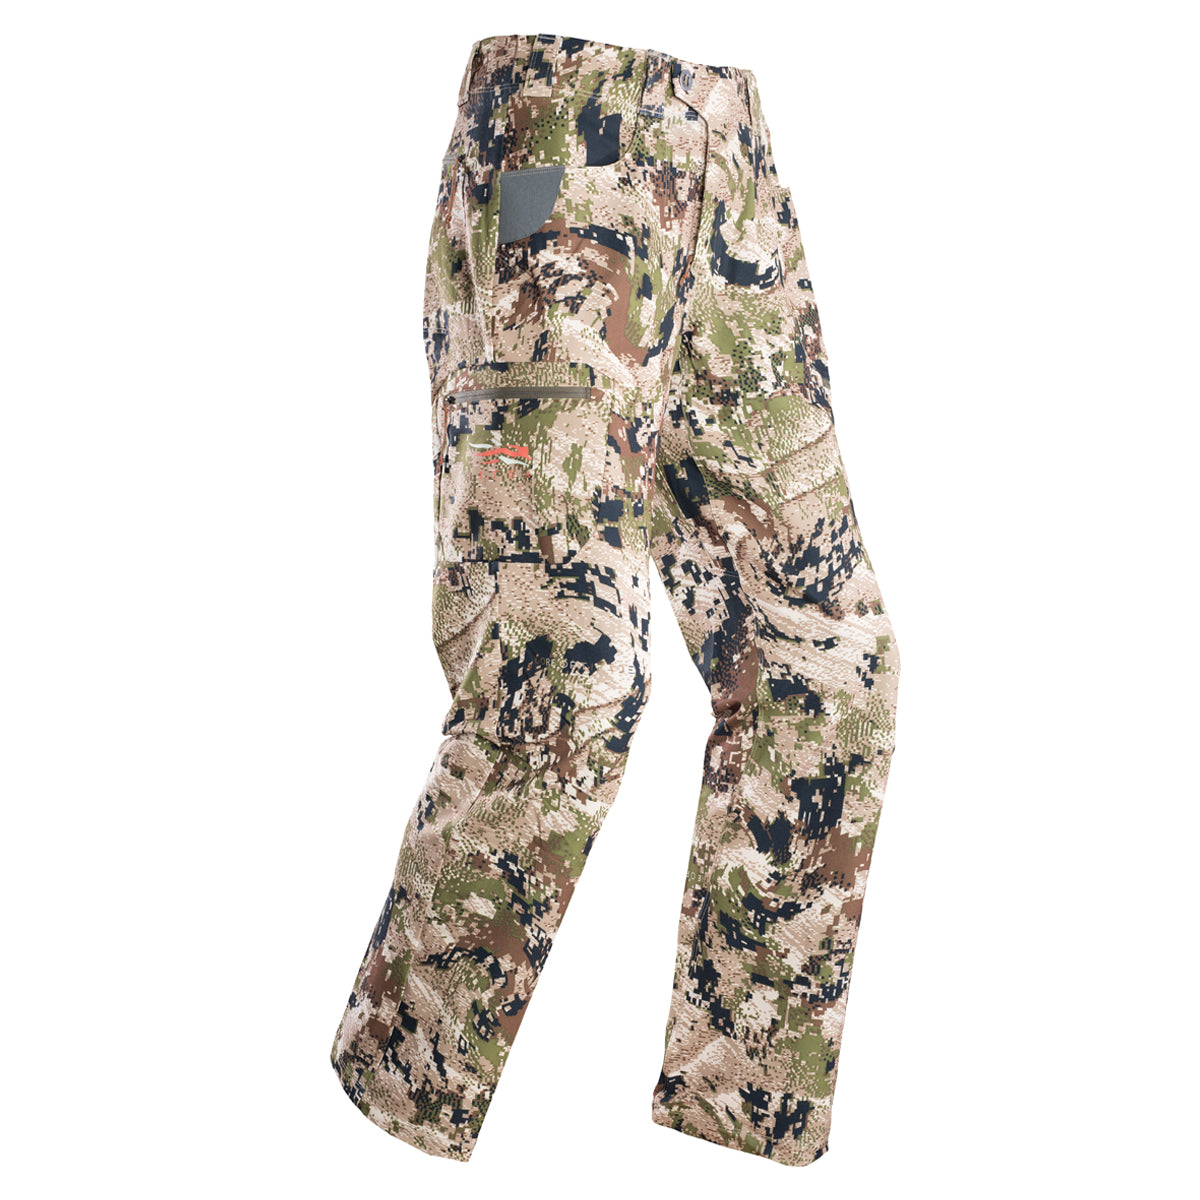 Sitka Traverse Pant (2021) in Optifade Subalpine by GOHUNT | Sitka - GOHUNT Shop